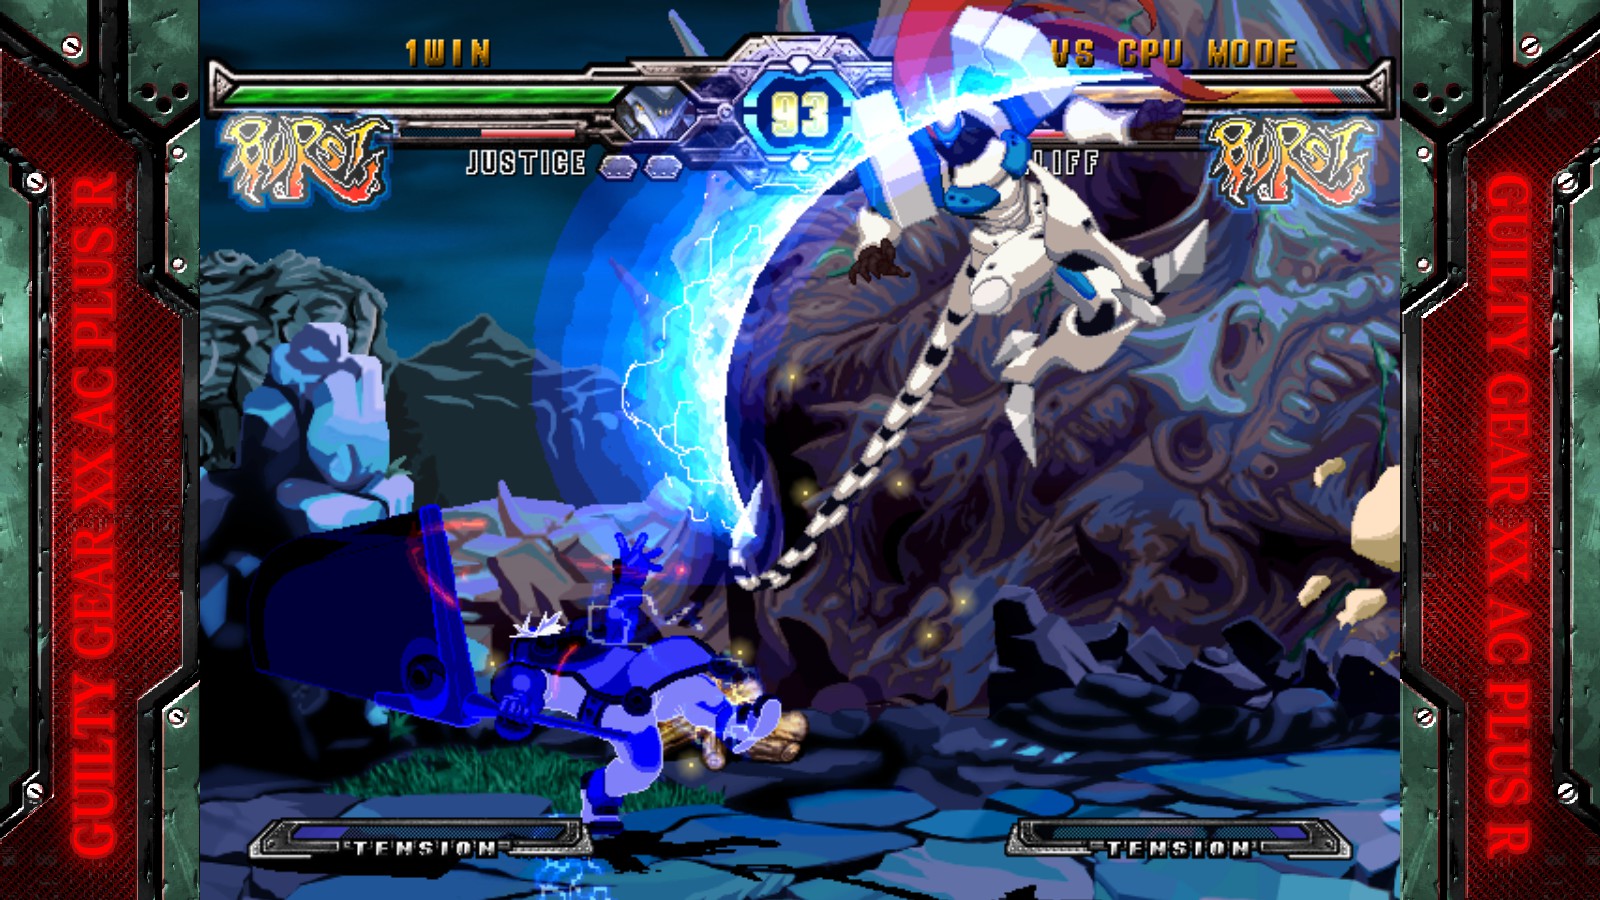 Download Guilty Gear Xx Accent Core Plus R Full Pc Game